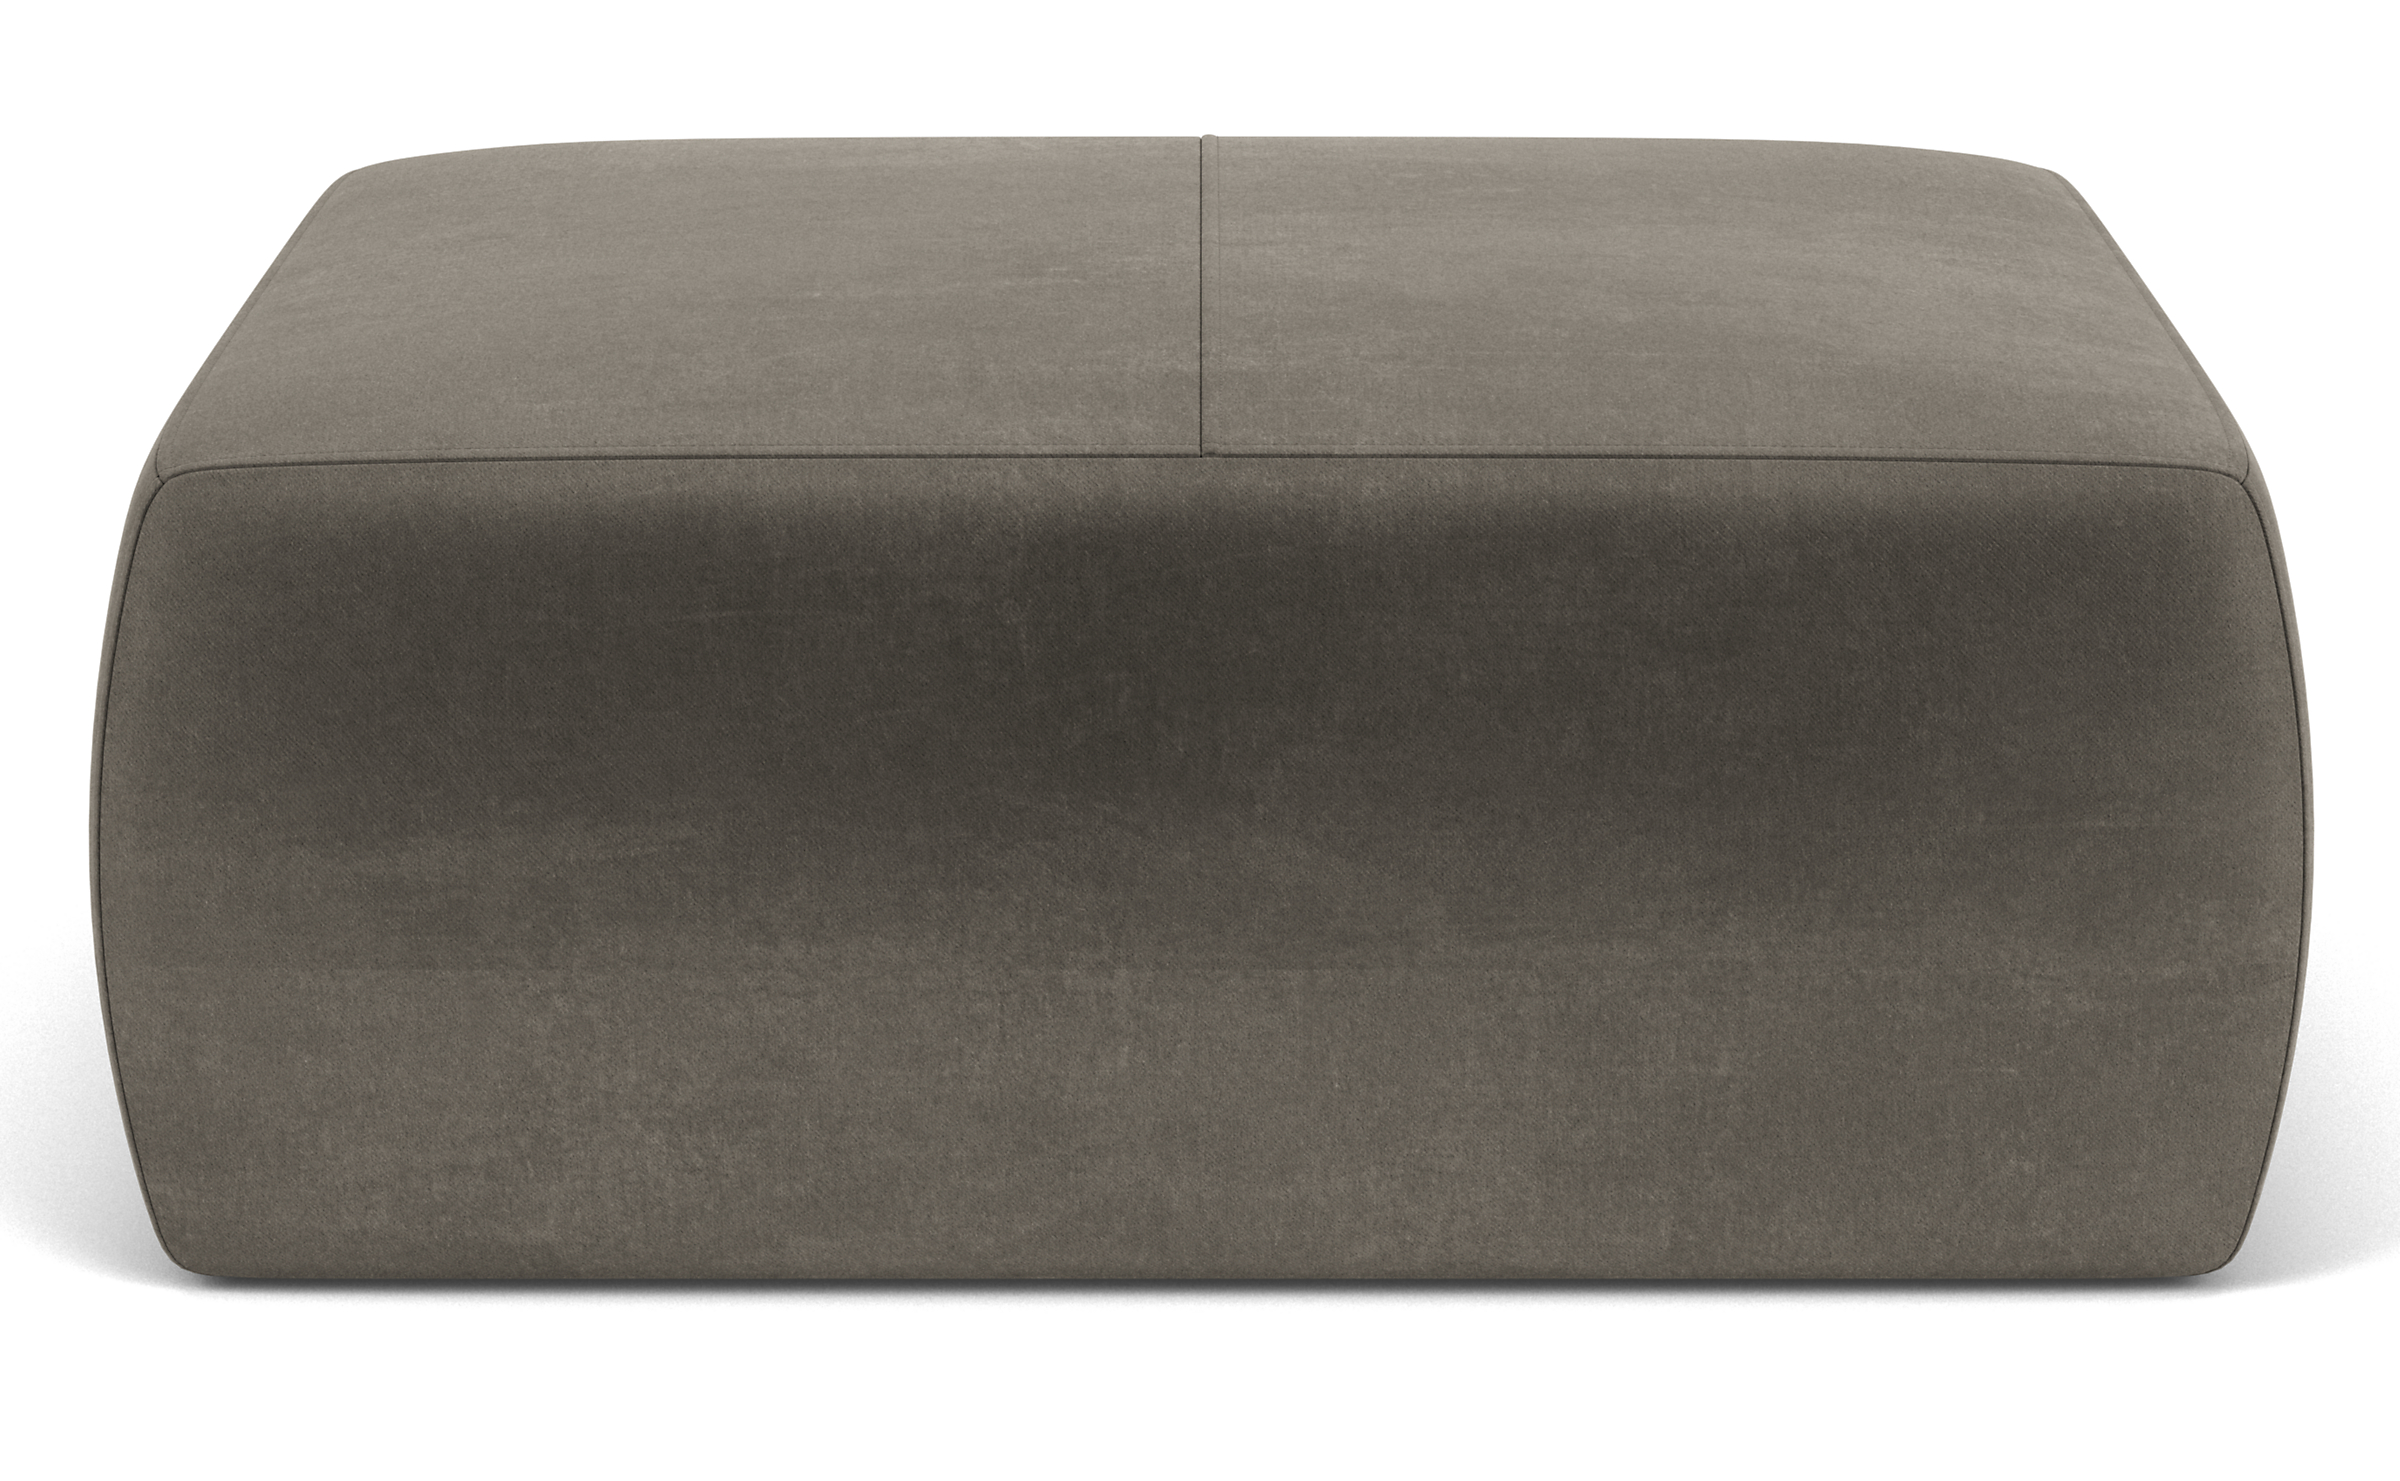 Lind 36w 36d 16h Square Ottoman in Banks Charcoal